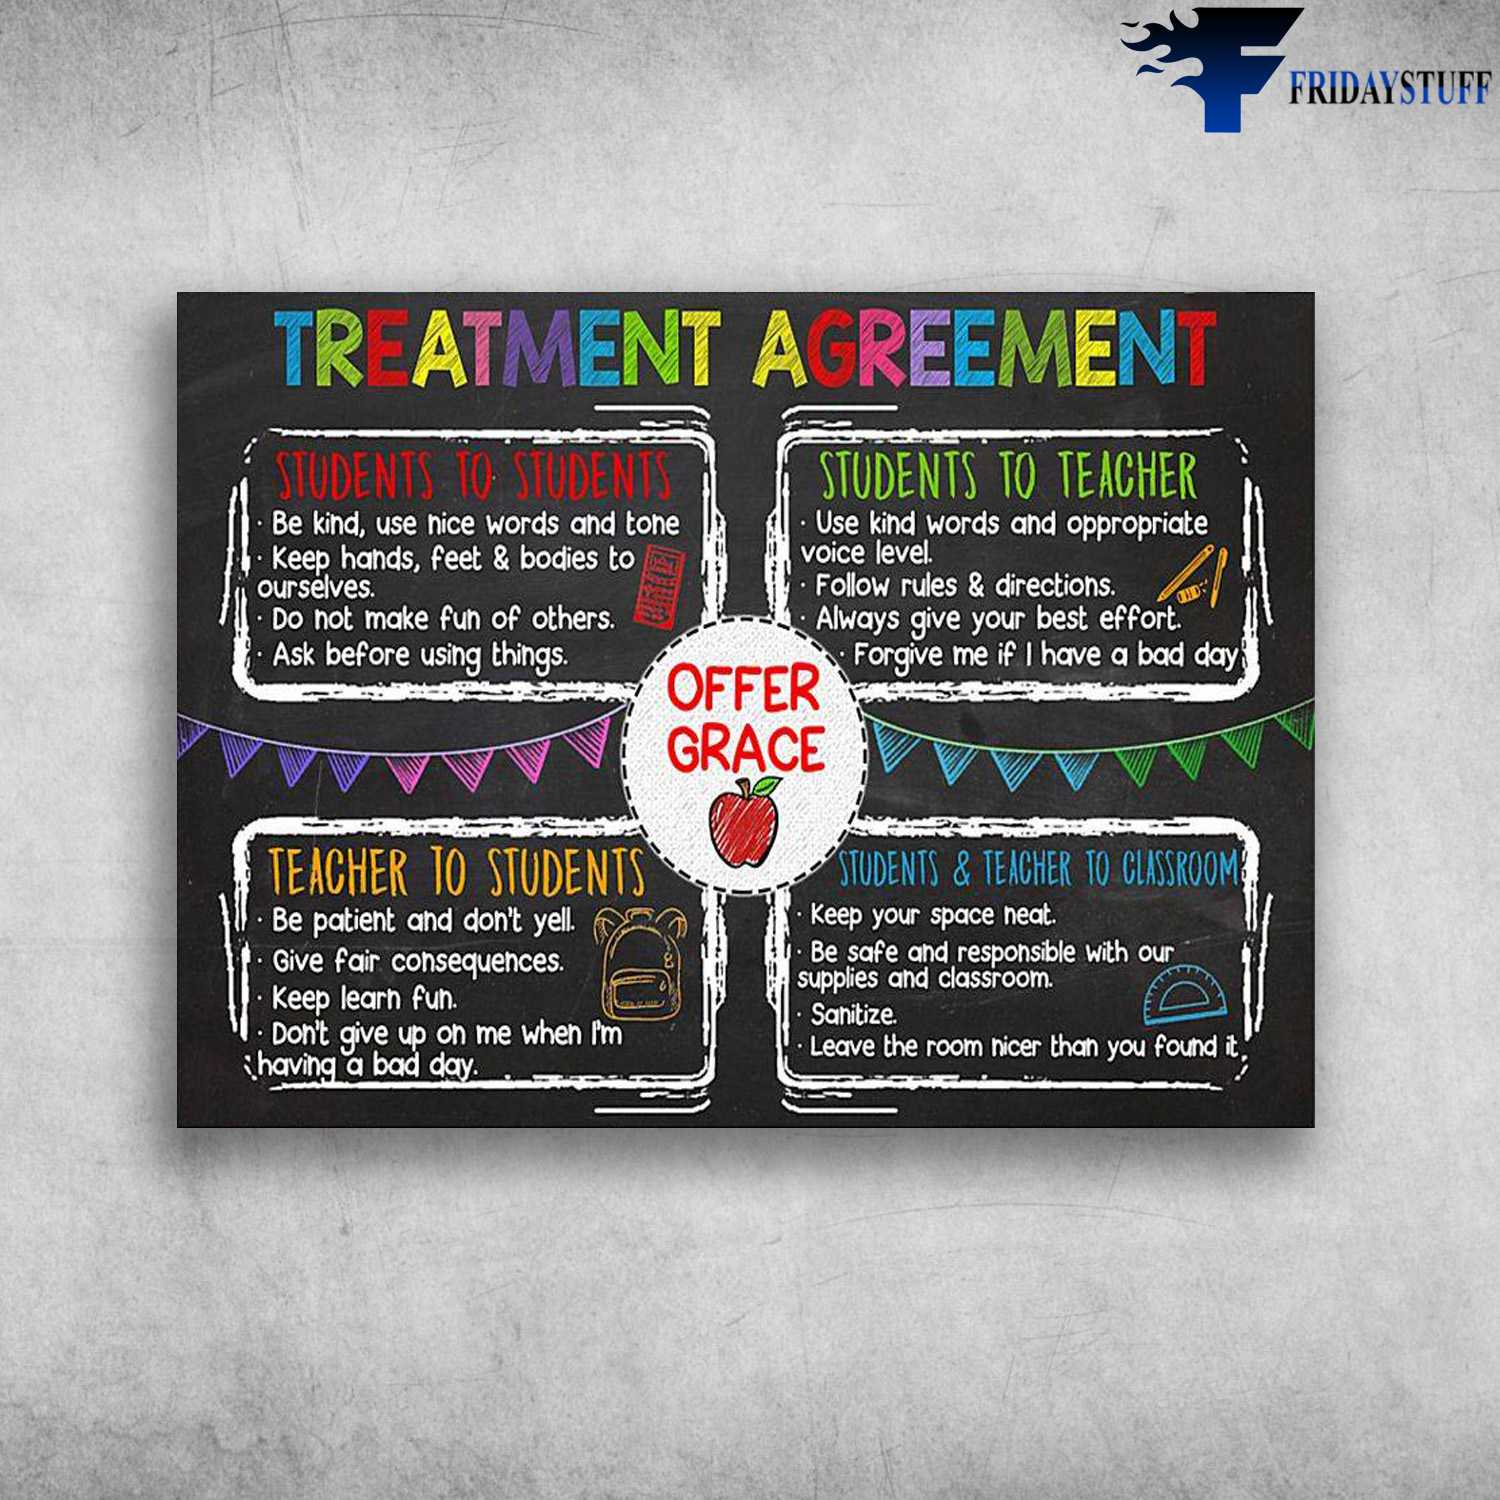 Treatment Agreement - Students To Student, Students To Teacher, Teacher To Students, Students And Teacher To Classroom, Offer Grace